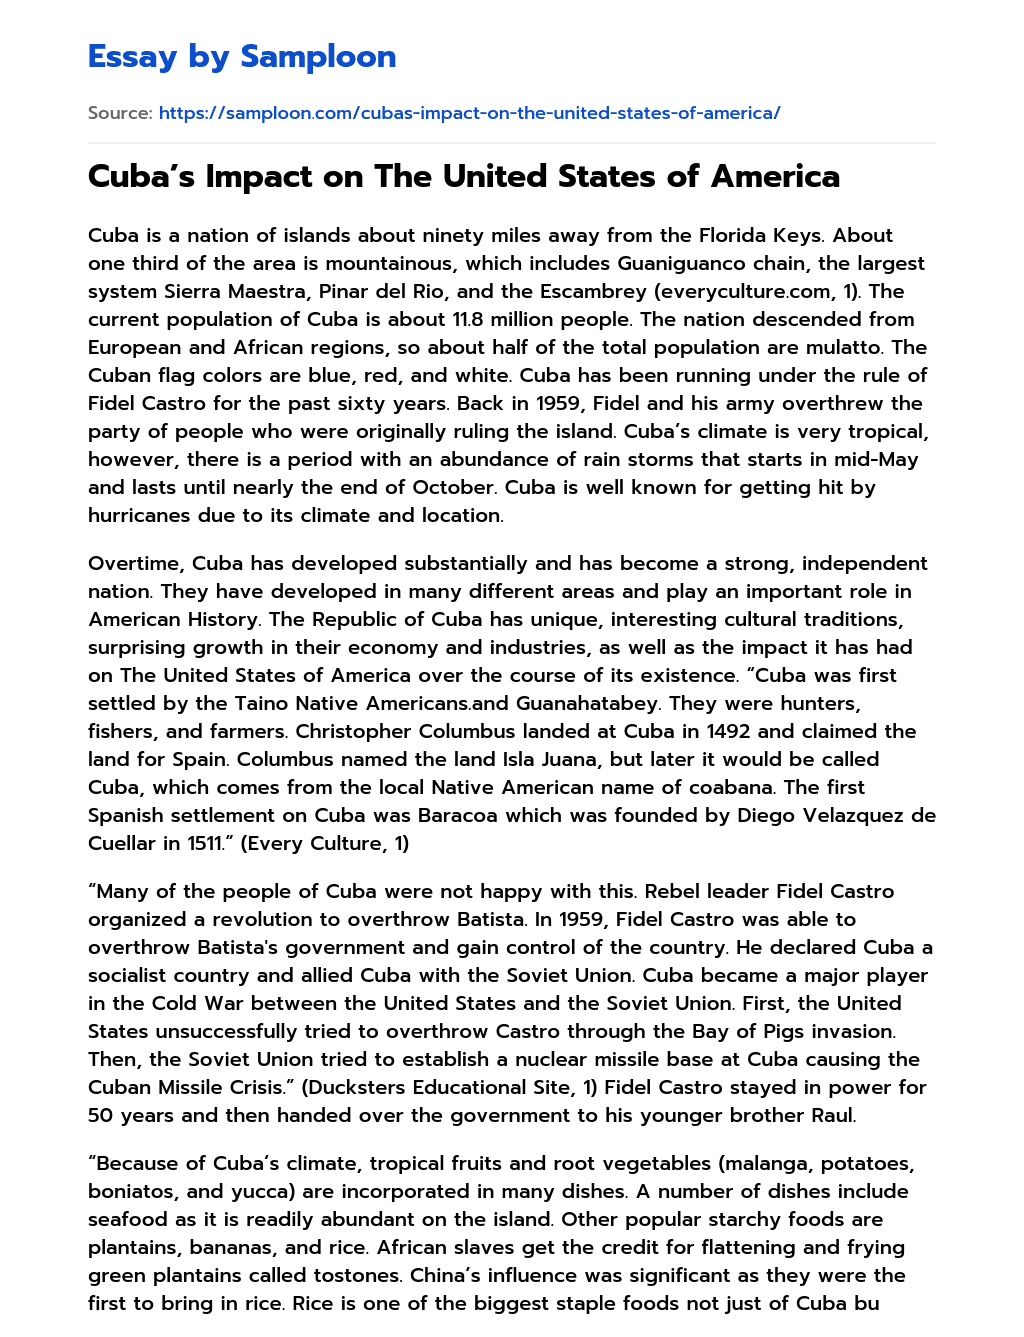 Cuba’s Impact on The United States of America essay